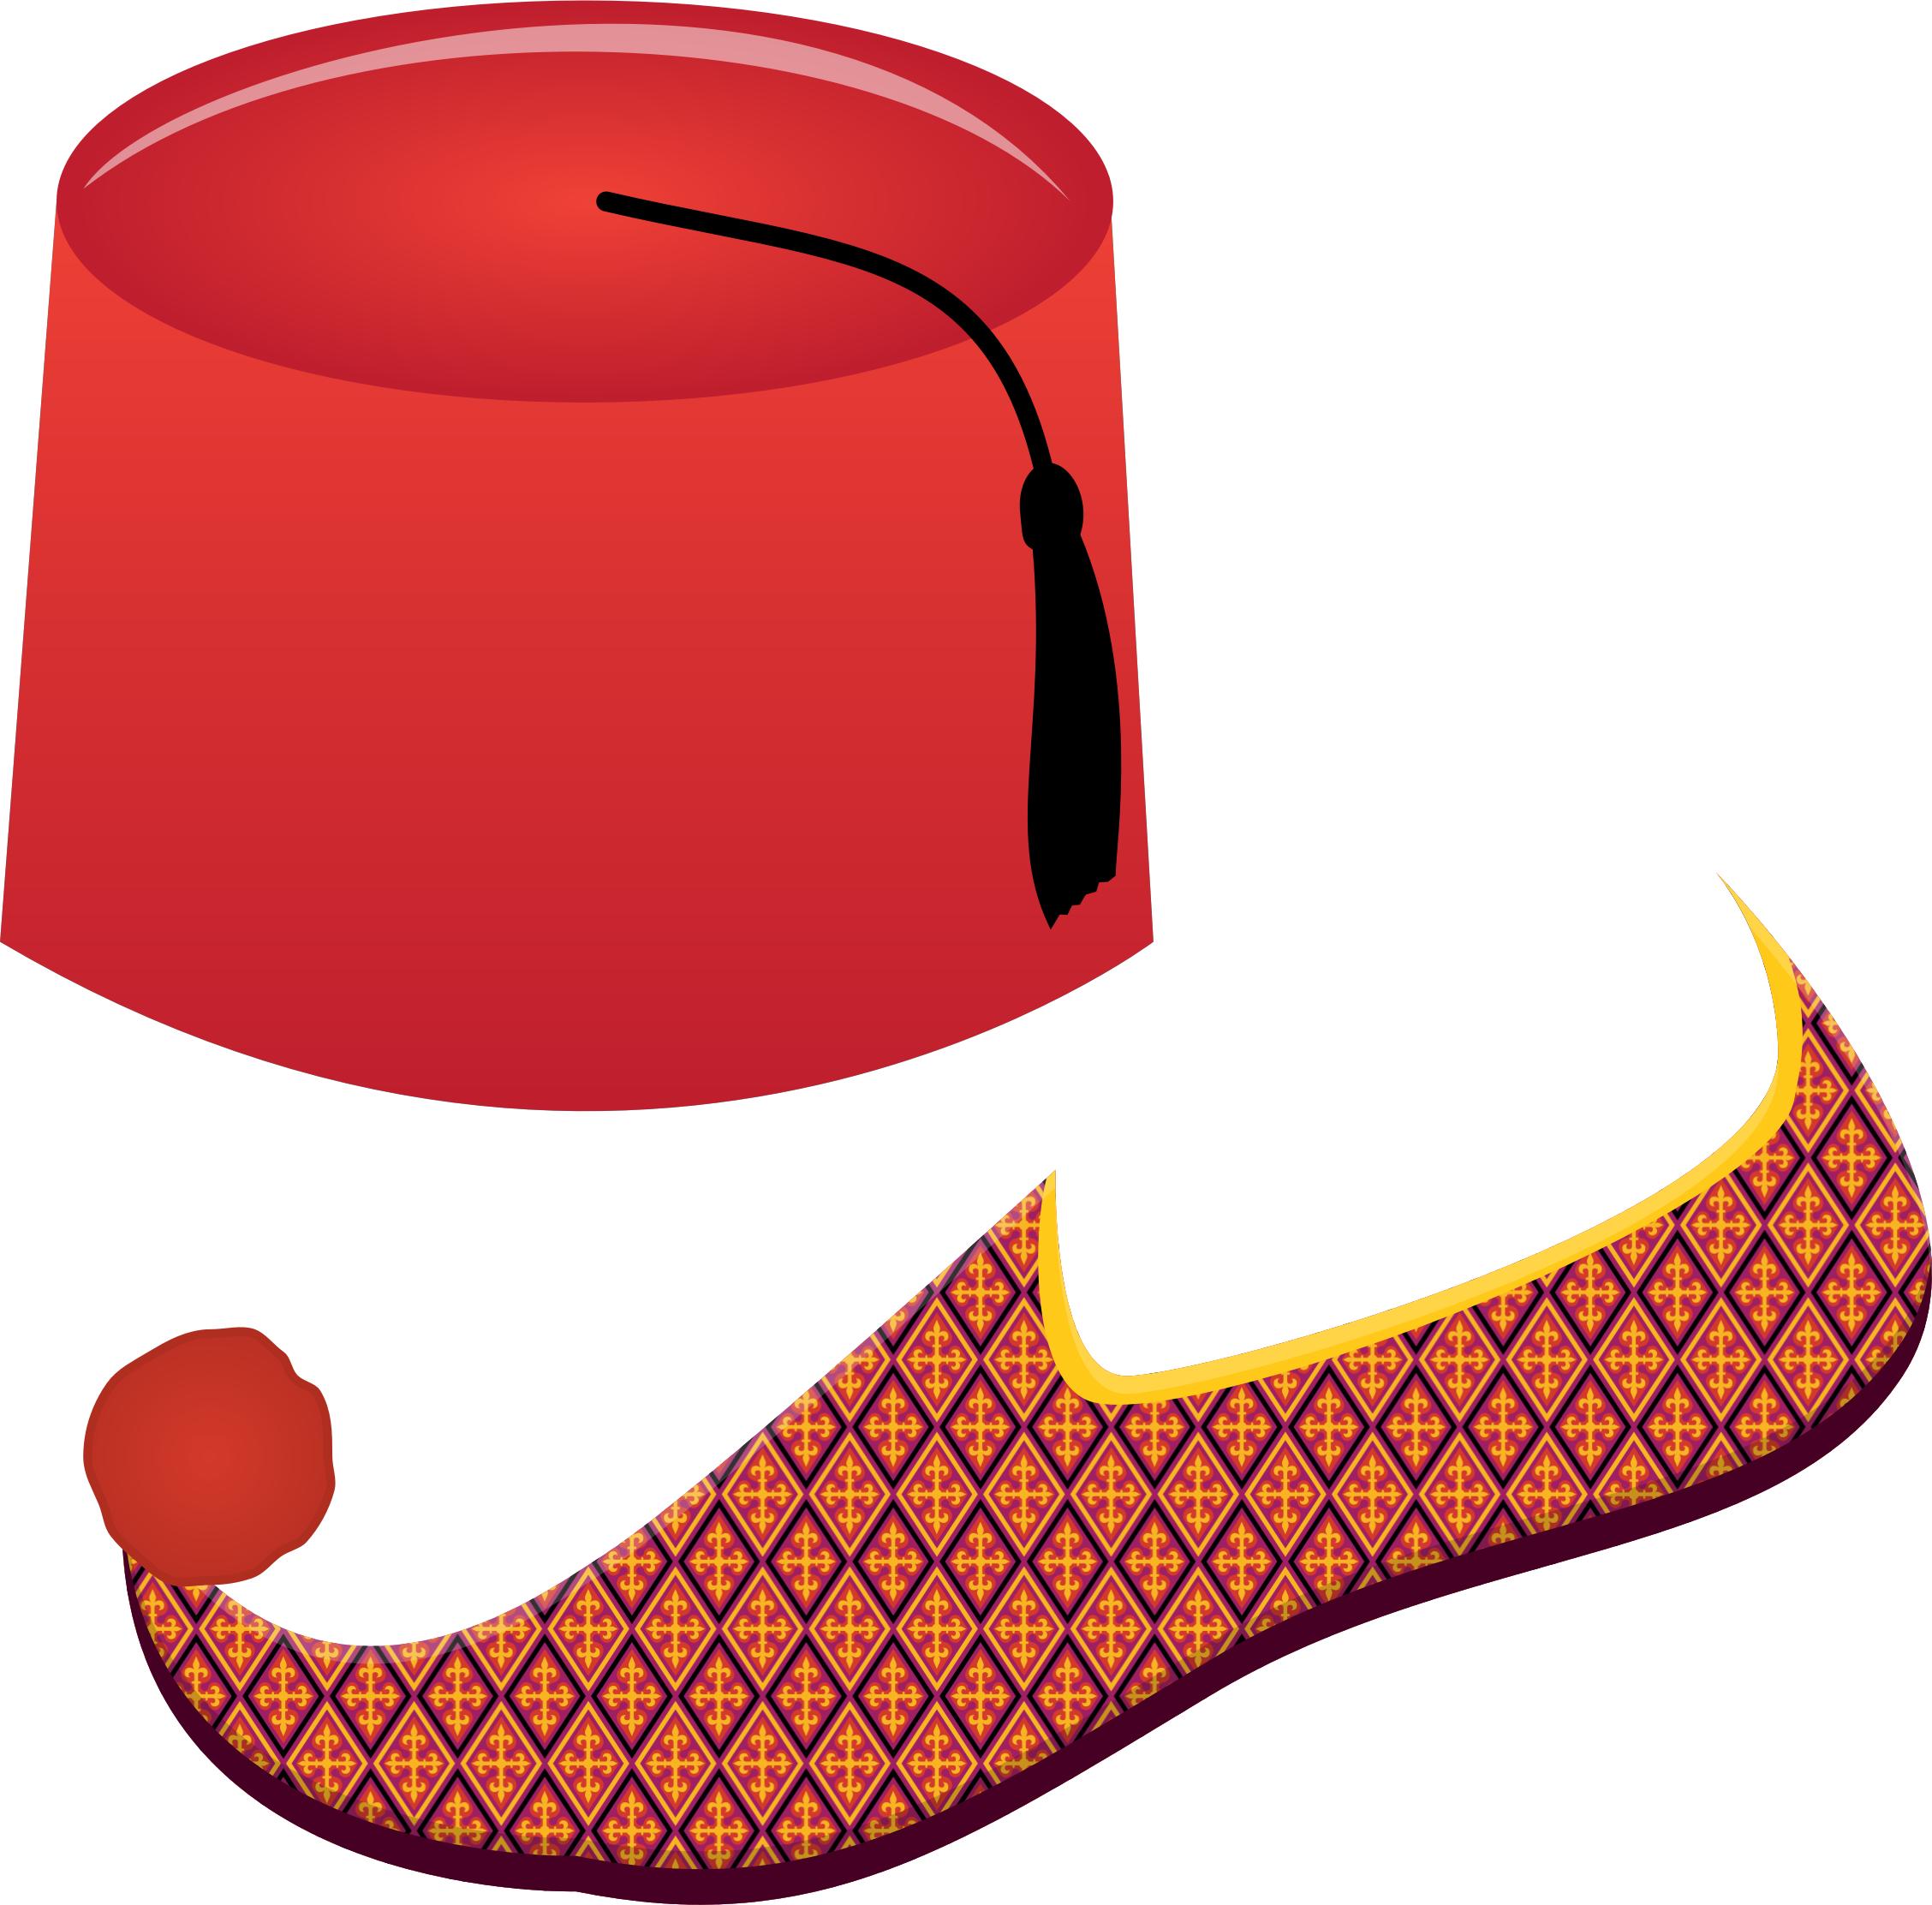 Fez and Turkish Shoe png